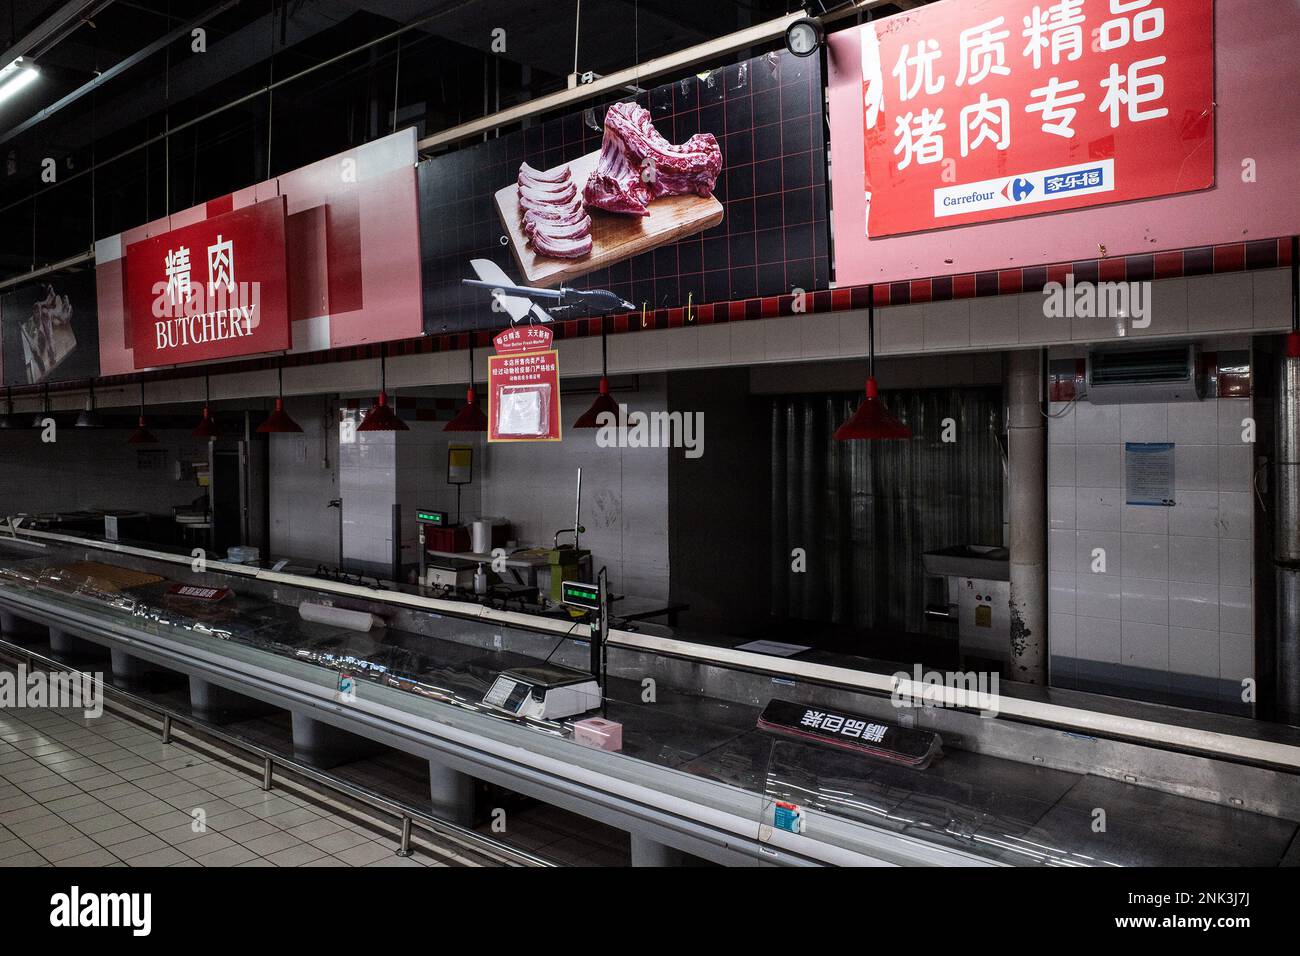 The butchers section has been cleared at a Carrefour store in Wuhan. Carrefour entered the Chinese market in the year 1995 and expanded very quickly, securing a large market share. However earnings began to get smaller as the competition kept on increasing. In the year 2019, the French retailer sold around 80% of its 'loss-making' China business to Jiangsu-based 'Suning' for CNY 4.8 billion which was equal to USD 699 million at the time).This month, reports of shortages at the many local Carrefour store have caught the attention of customers. Several people started complaining that they have b Stock Photo